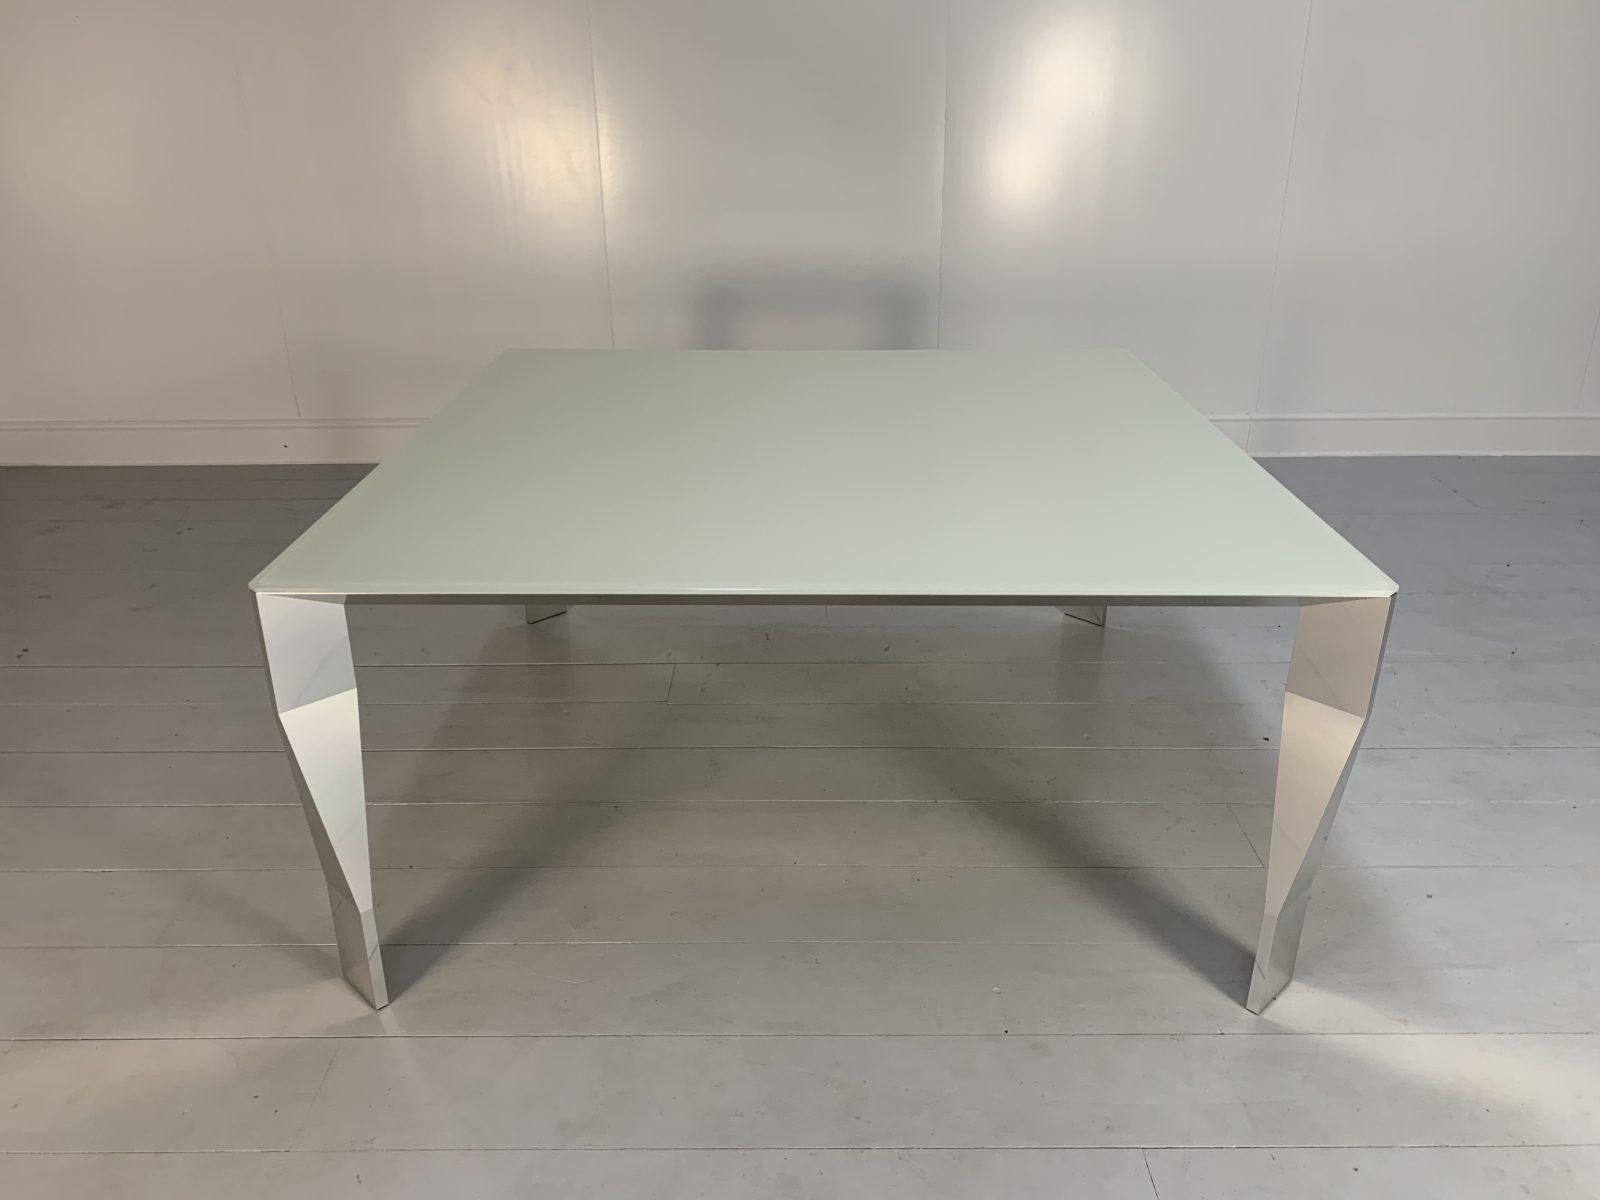 Hello Friends, and welcome to another unmissable offering from Lord Browns Furniture, the UK’s premier resource for fine Sofas and Chairs.

On offer on this occasion is a sublime, impeccable “Diamond” Square Occasional/Dining Table in